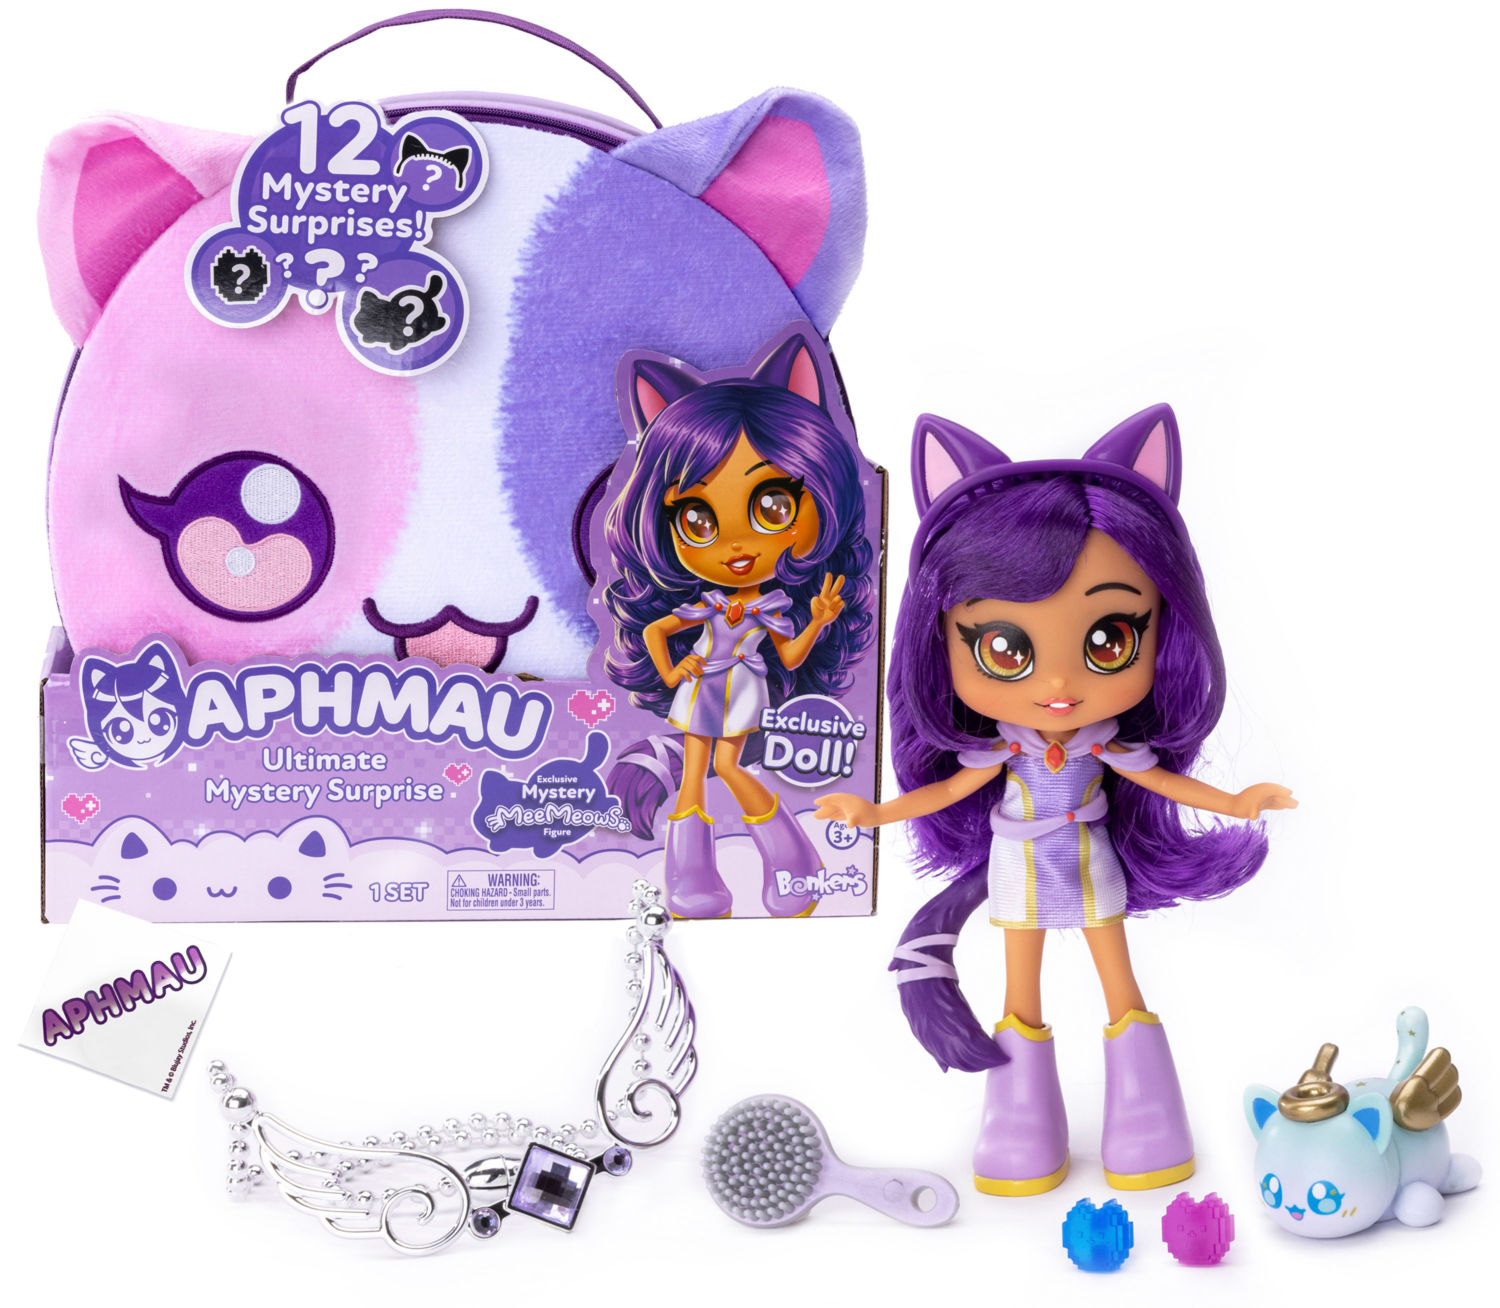 APHMAU MYSTERY MEEMEOWS SURPRISE FIGURE — LITTER 2 - The Toy Insider